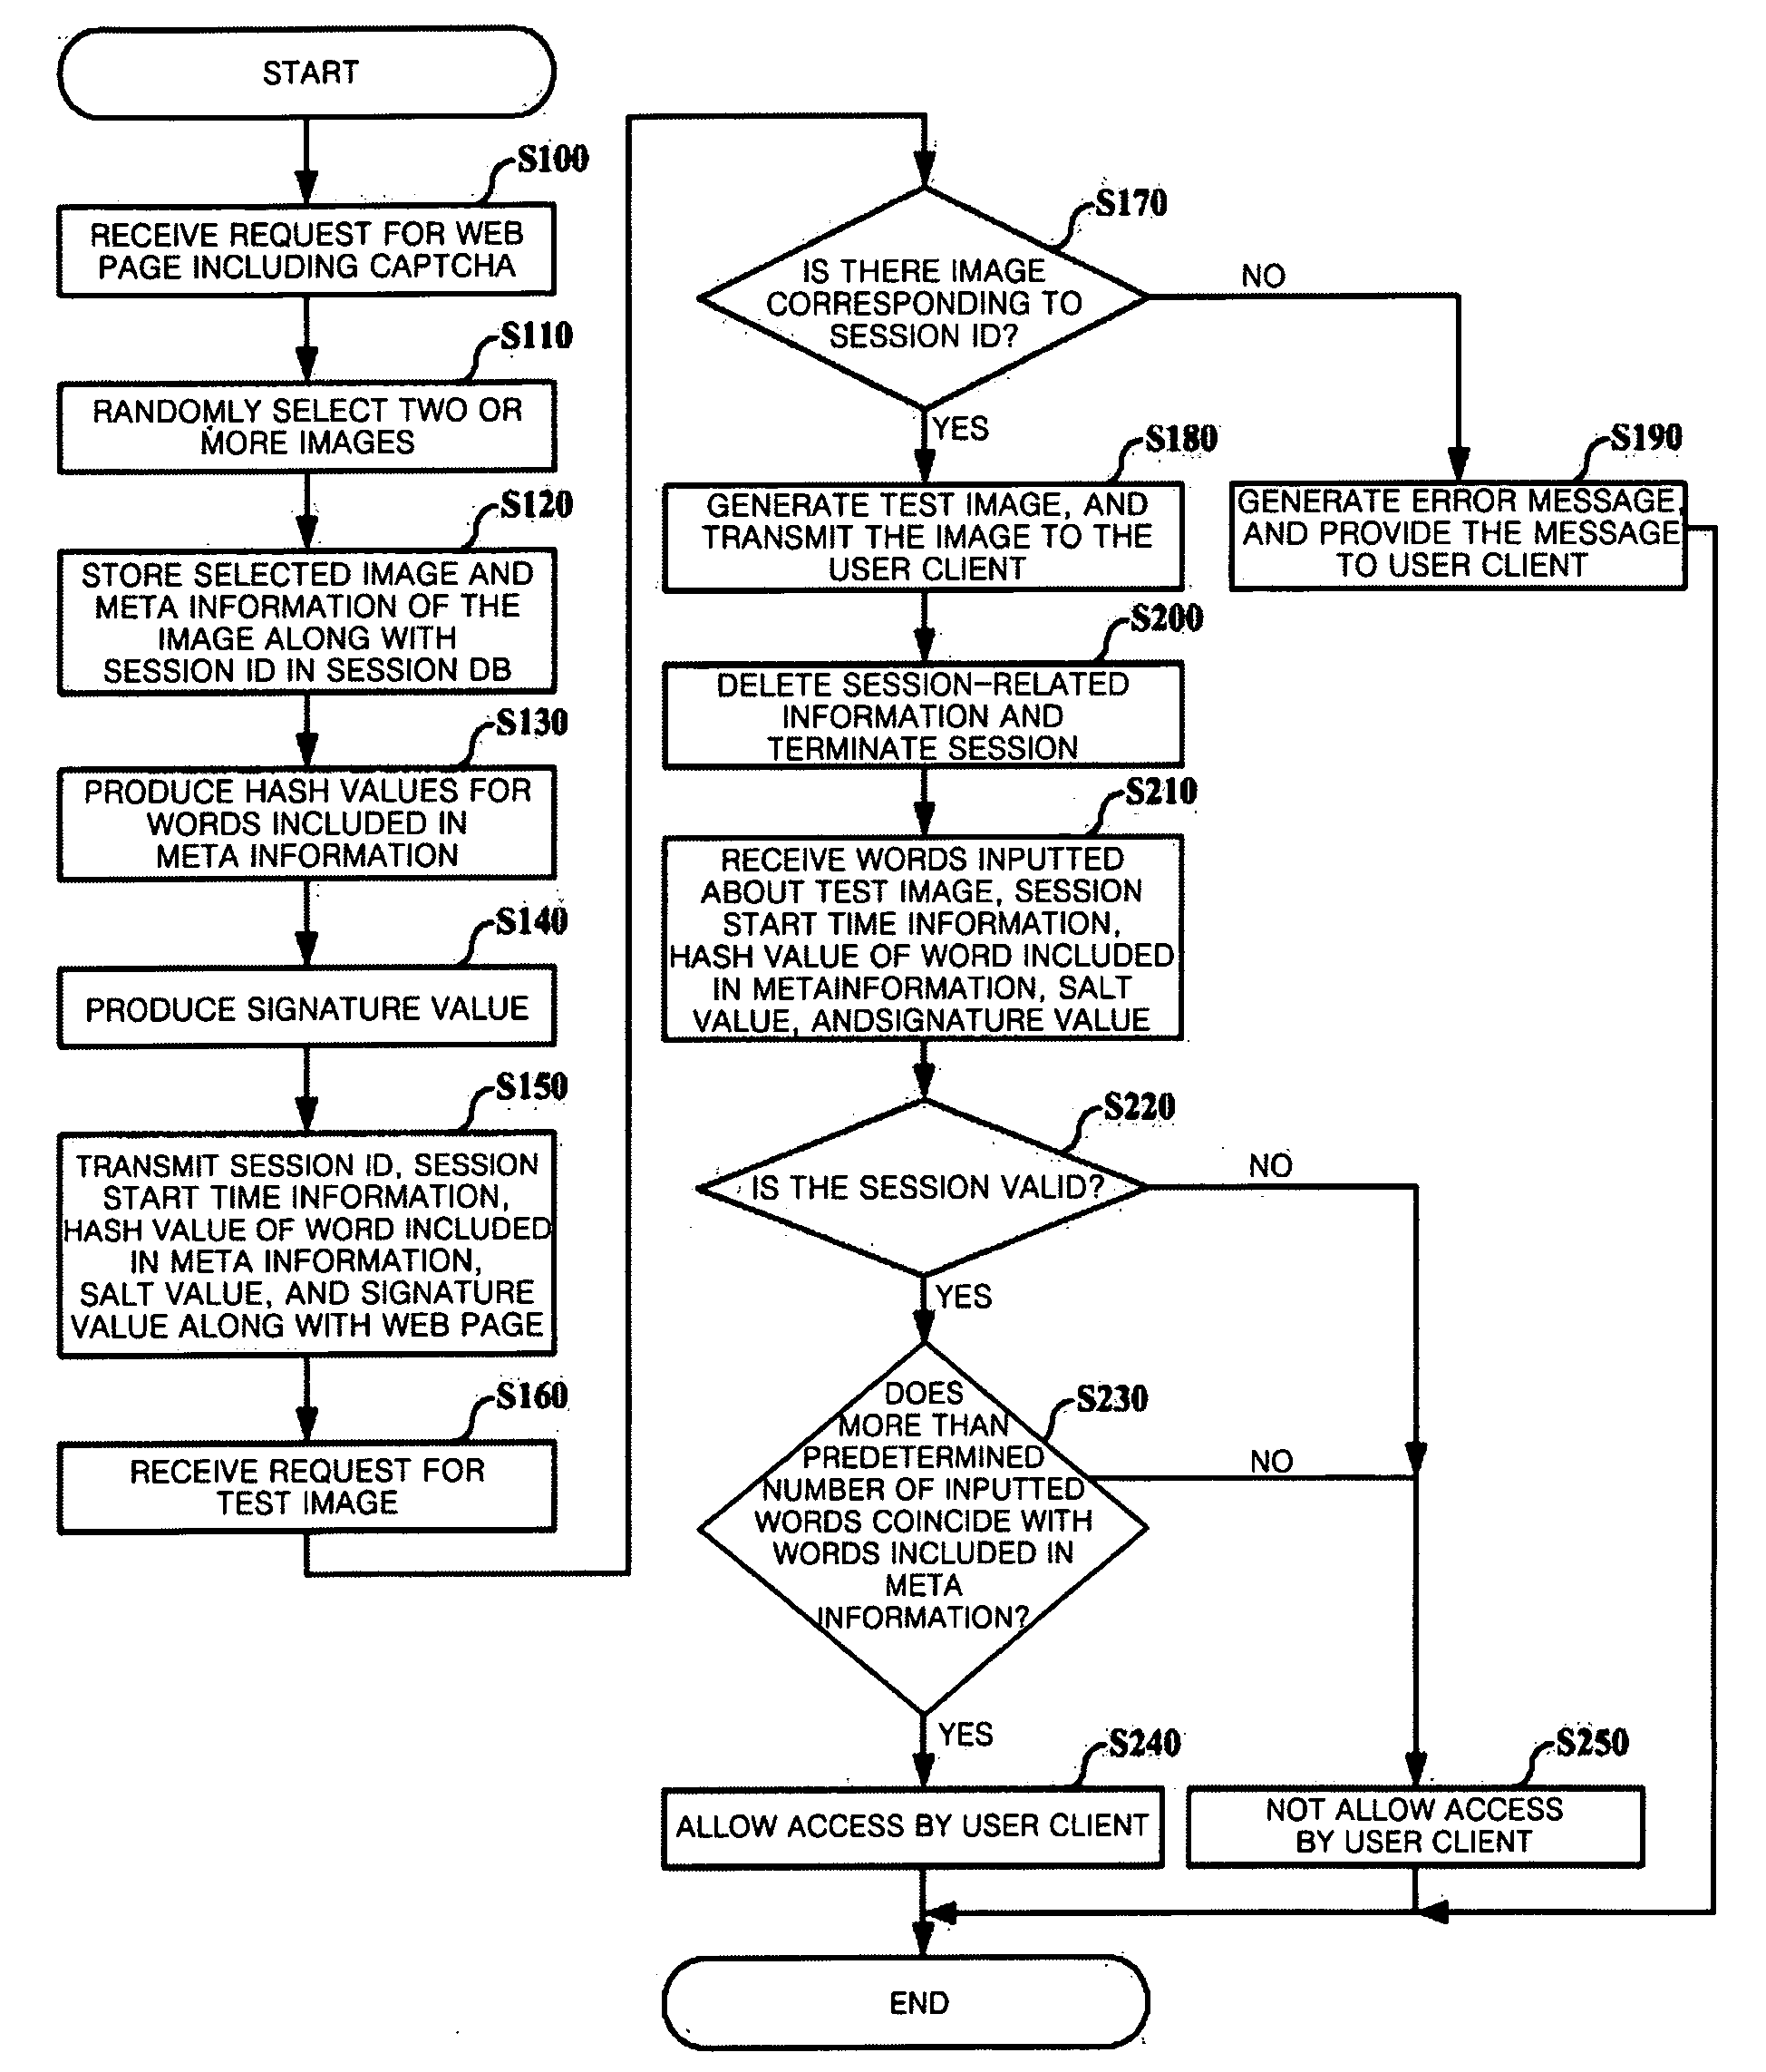 Method of providing completely automated public turing test to tell computer and human apart based on image